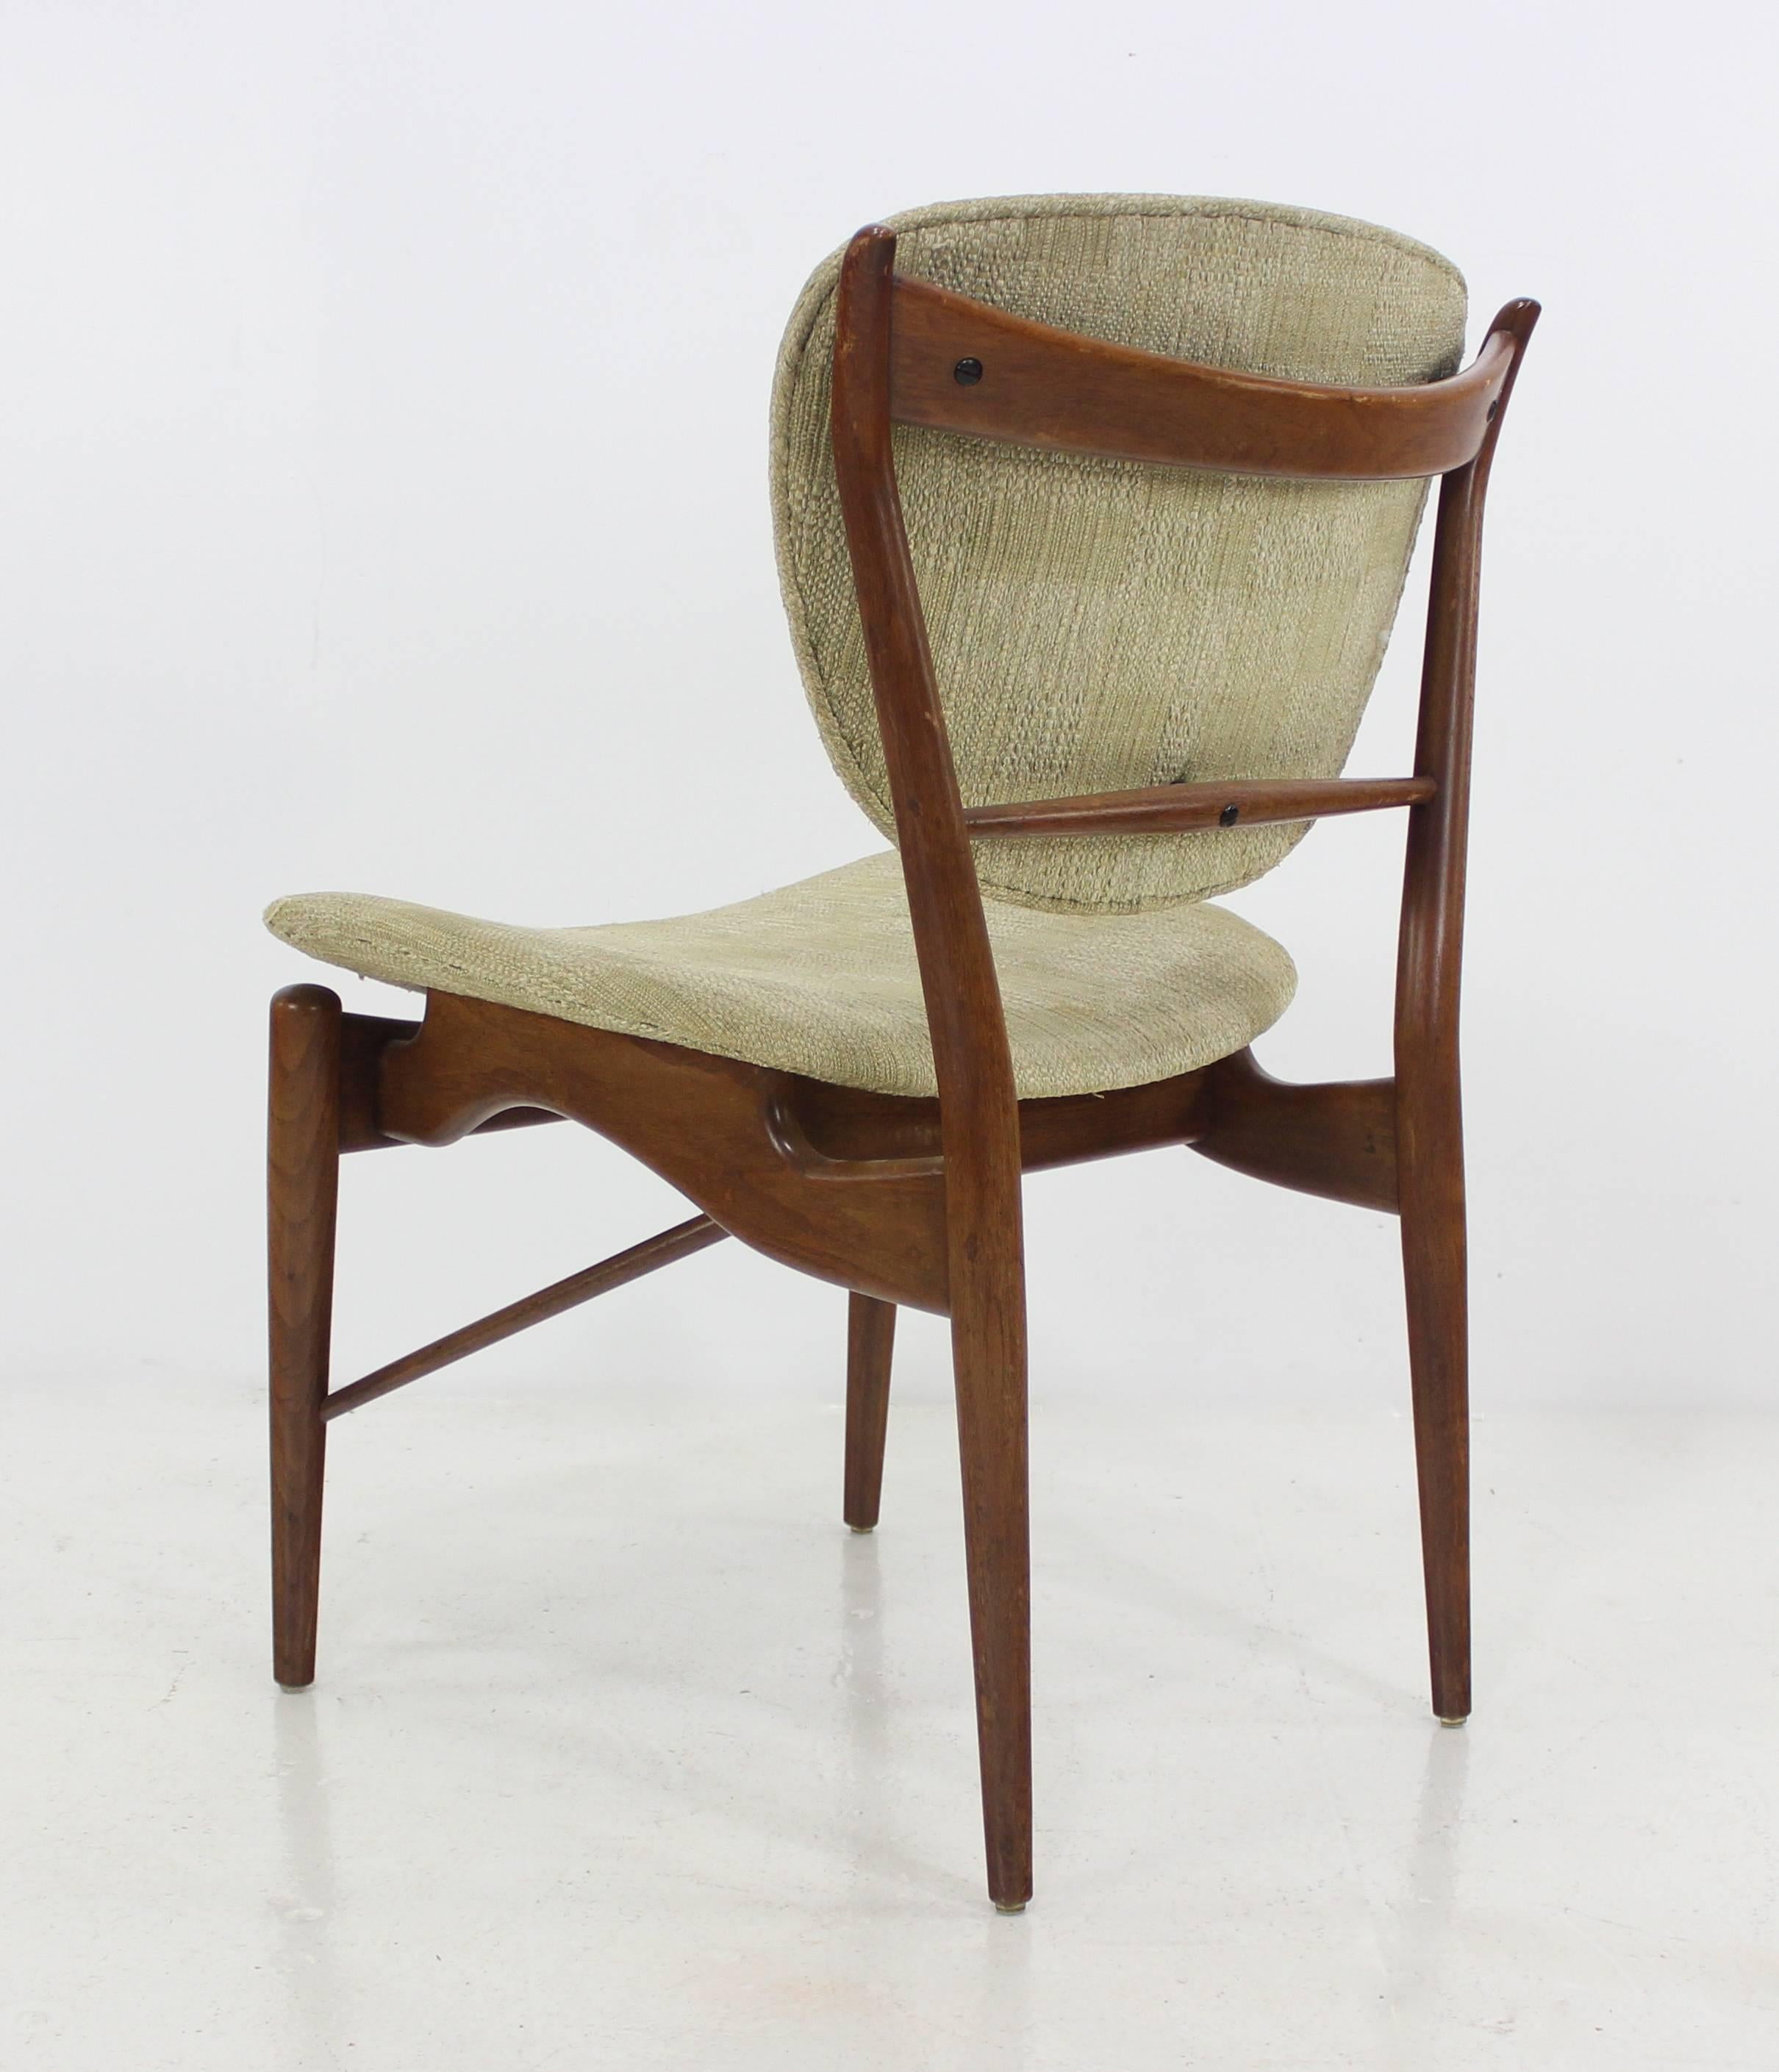 Set of Five Danish Modern Teak Chairs Designed by Finn Juhl for Baker In Excellent Condition For Sale In Portland, OR